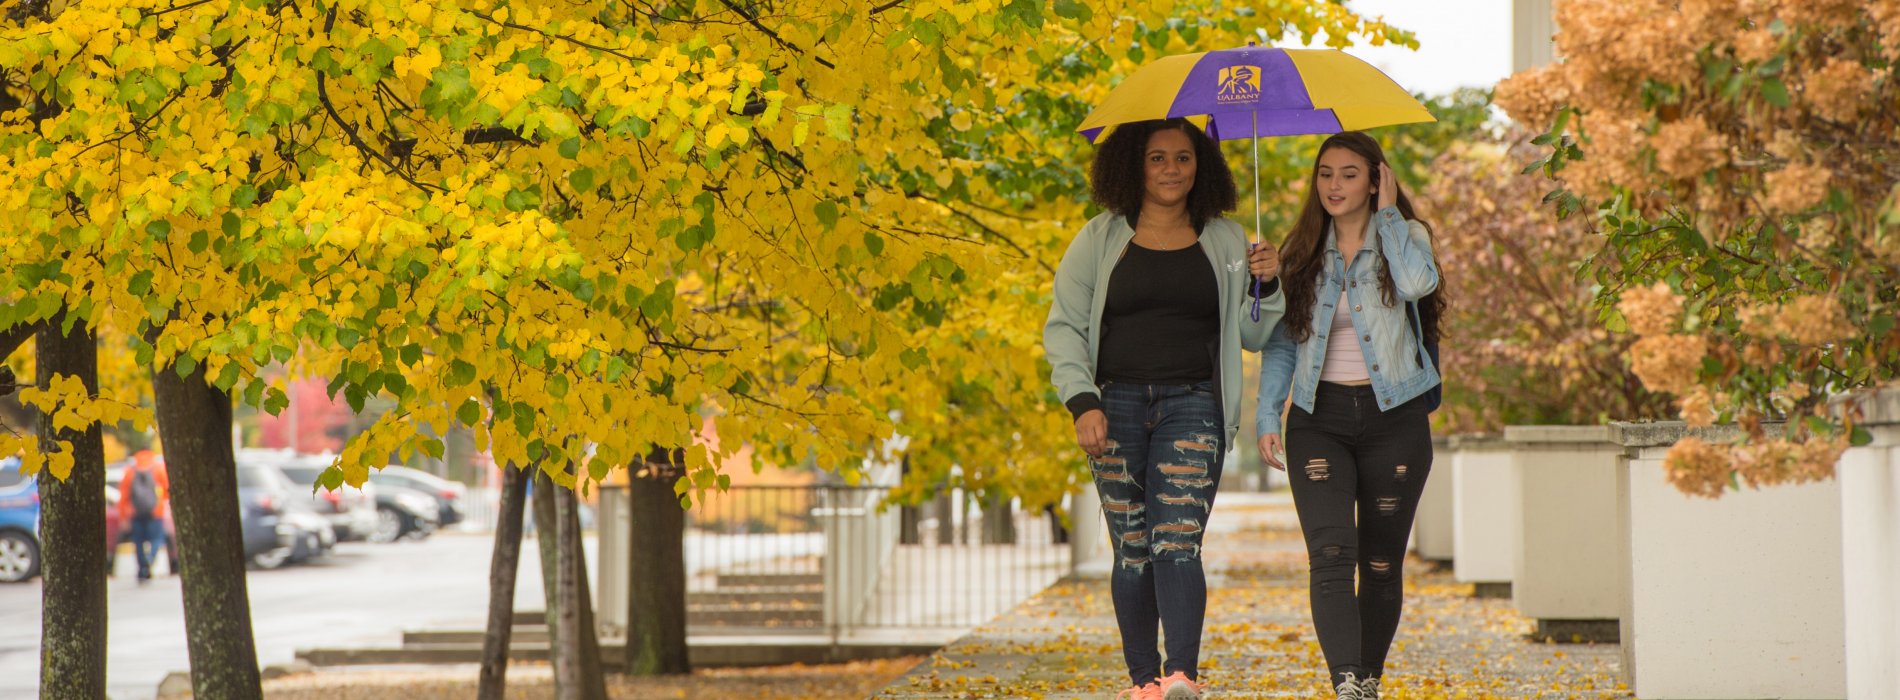 Two students walk across campus under a UAlbany umbrella and falling yellow leaves